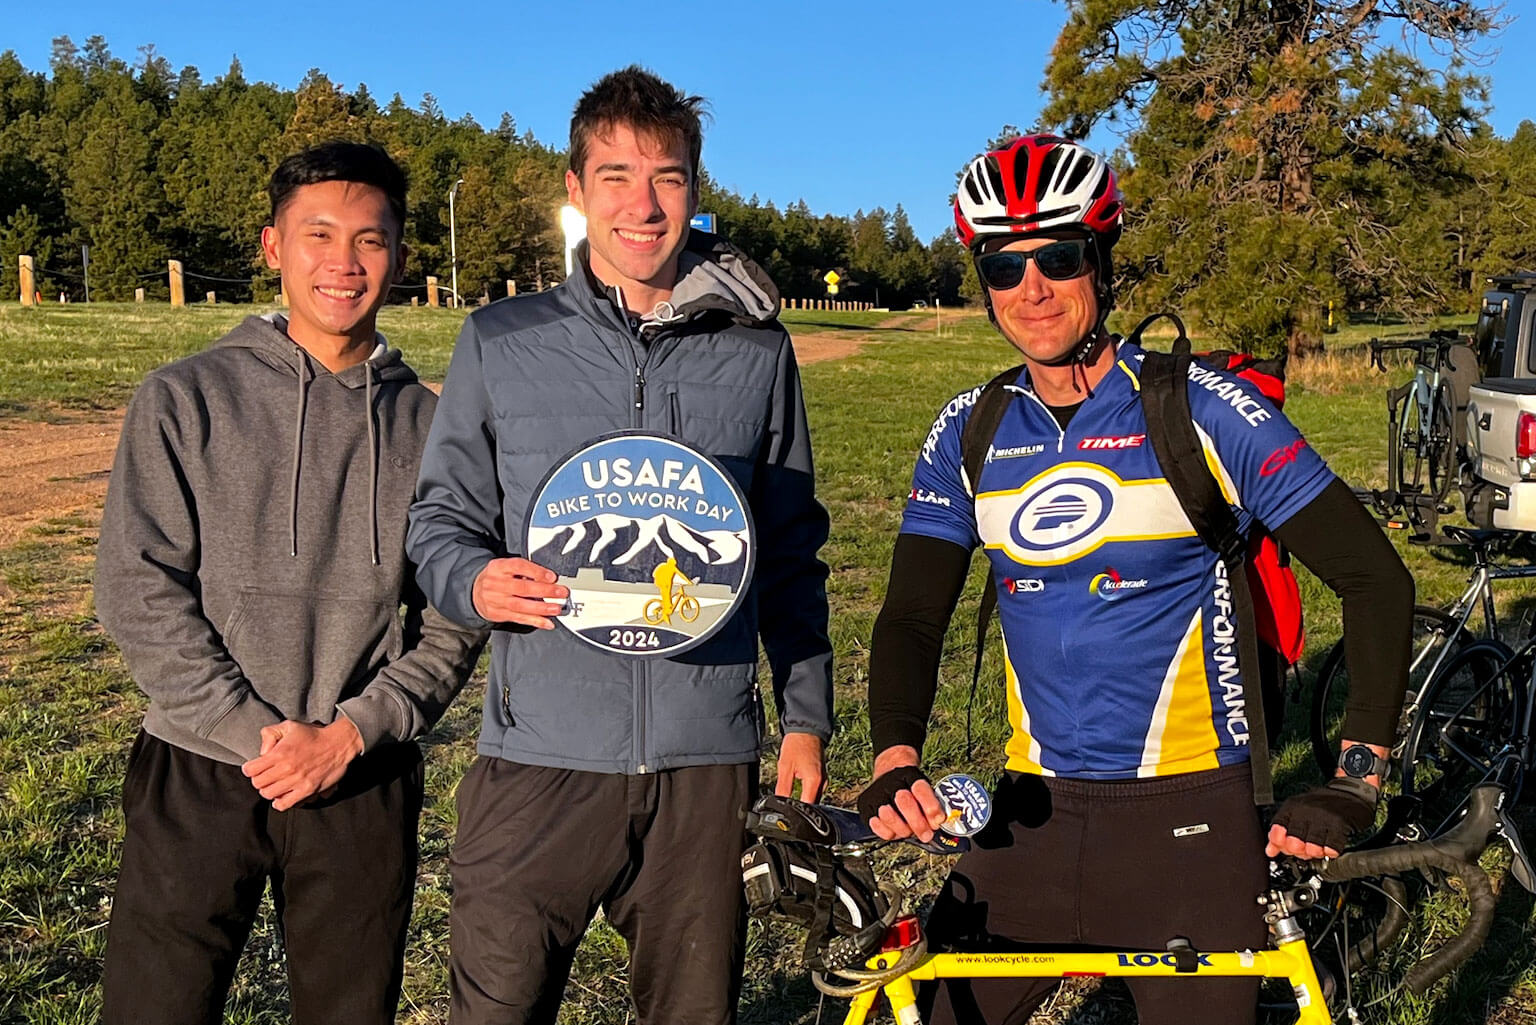 Cadet 2nd Class Emmanuel Lorenzo, left, Cadet 1st Class Sean Maison, middle, and U.S. Air Force Lt. Col. Ryan Carr pose for a photo before their Bike to Work commute.